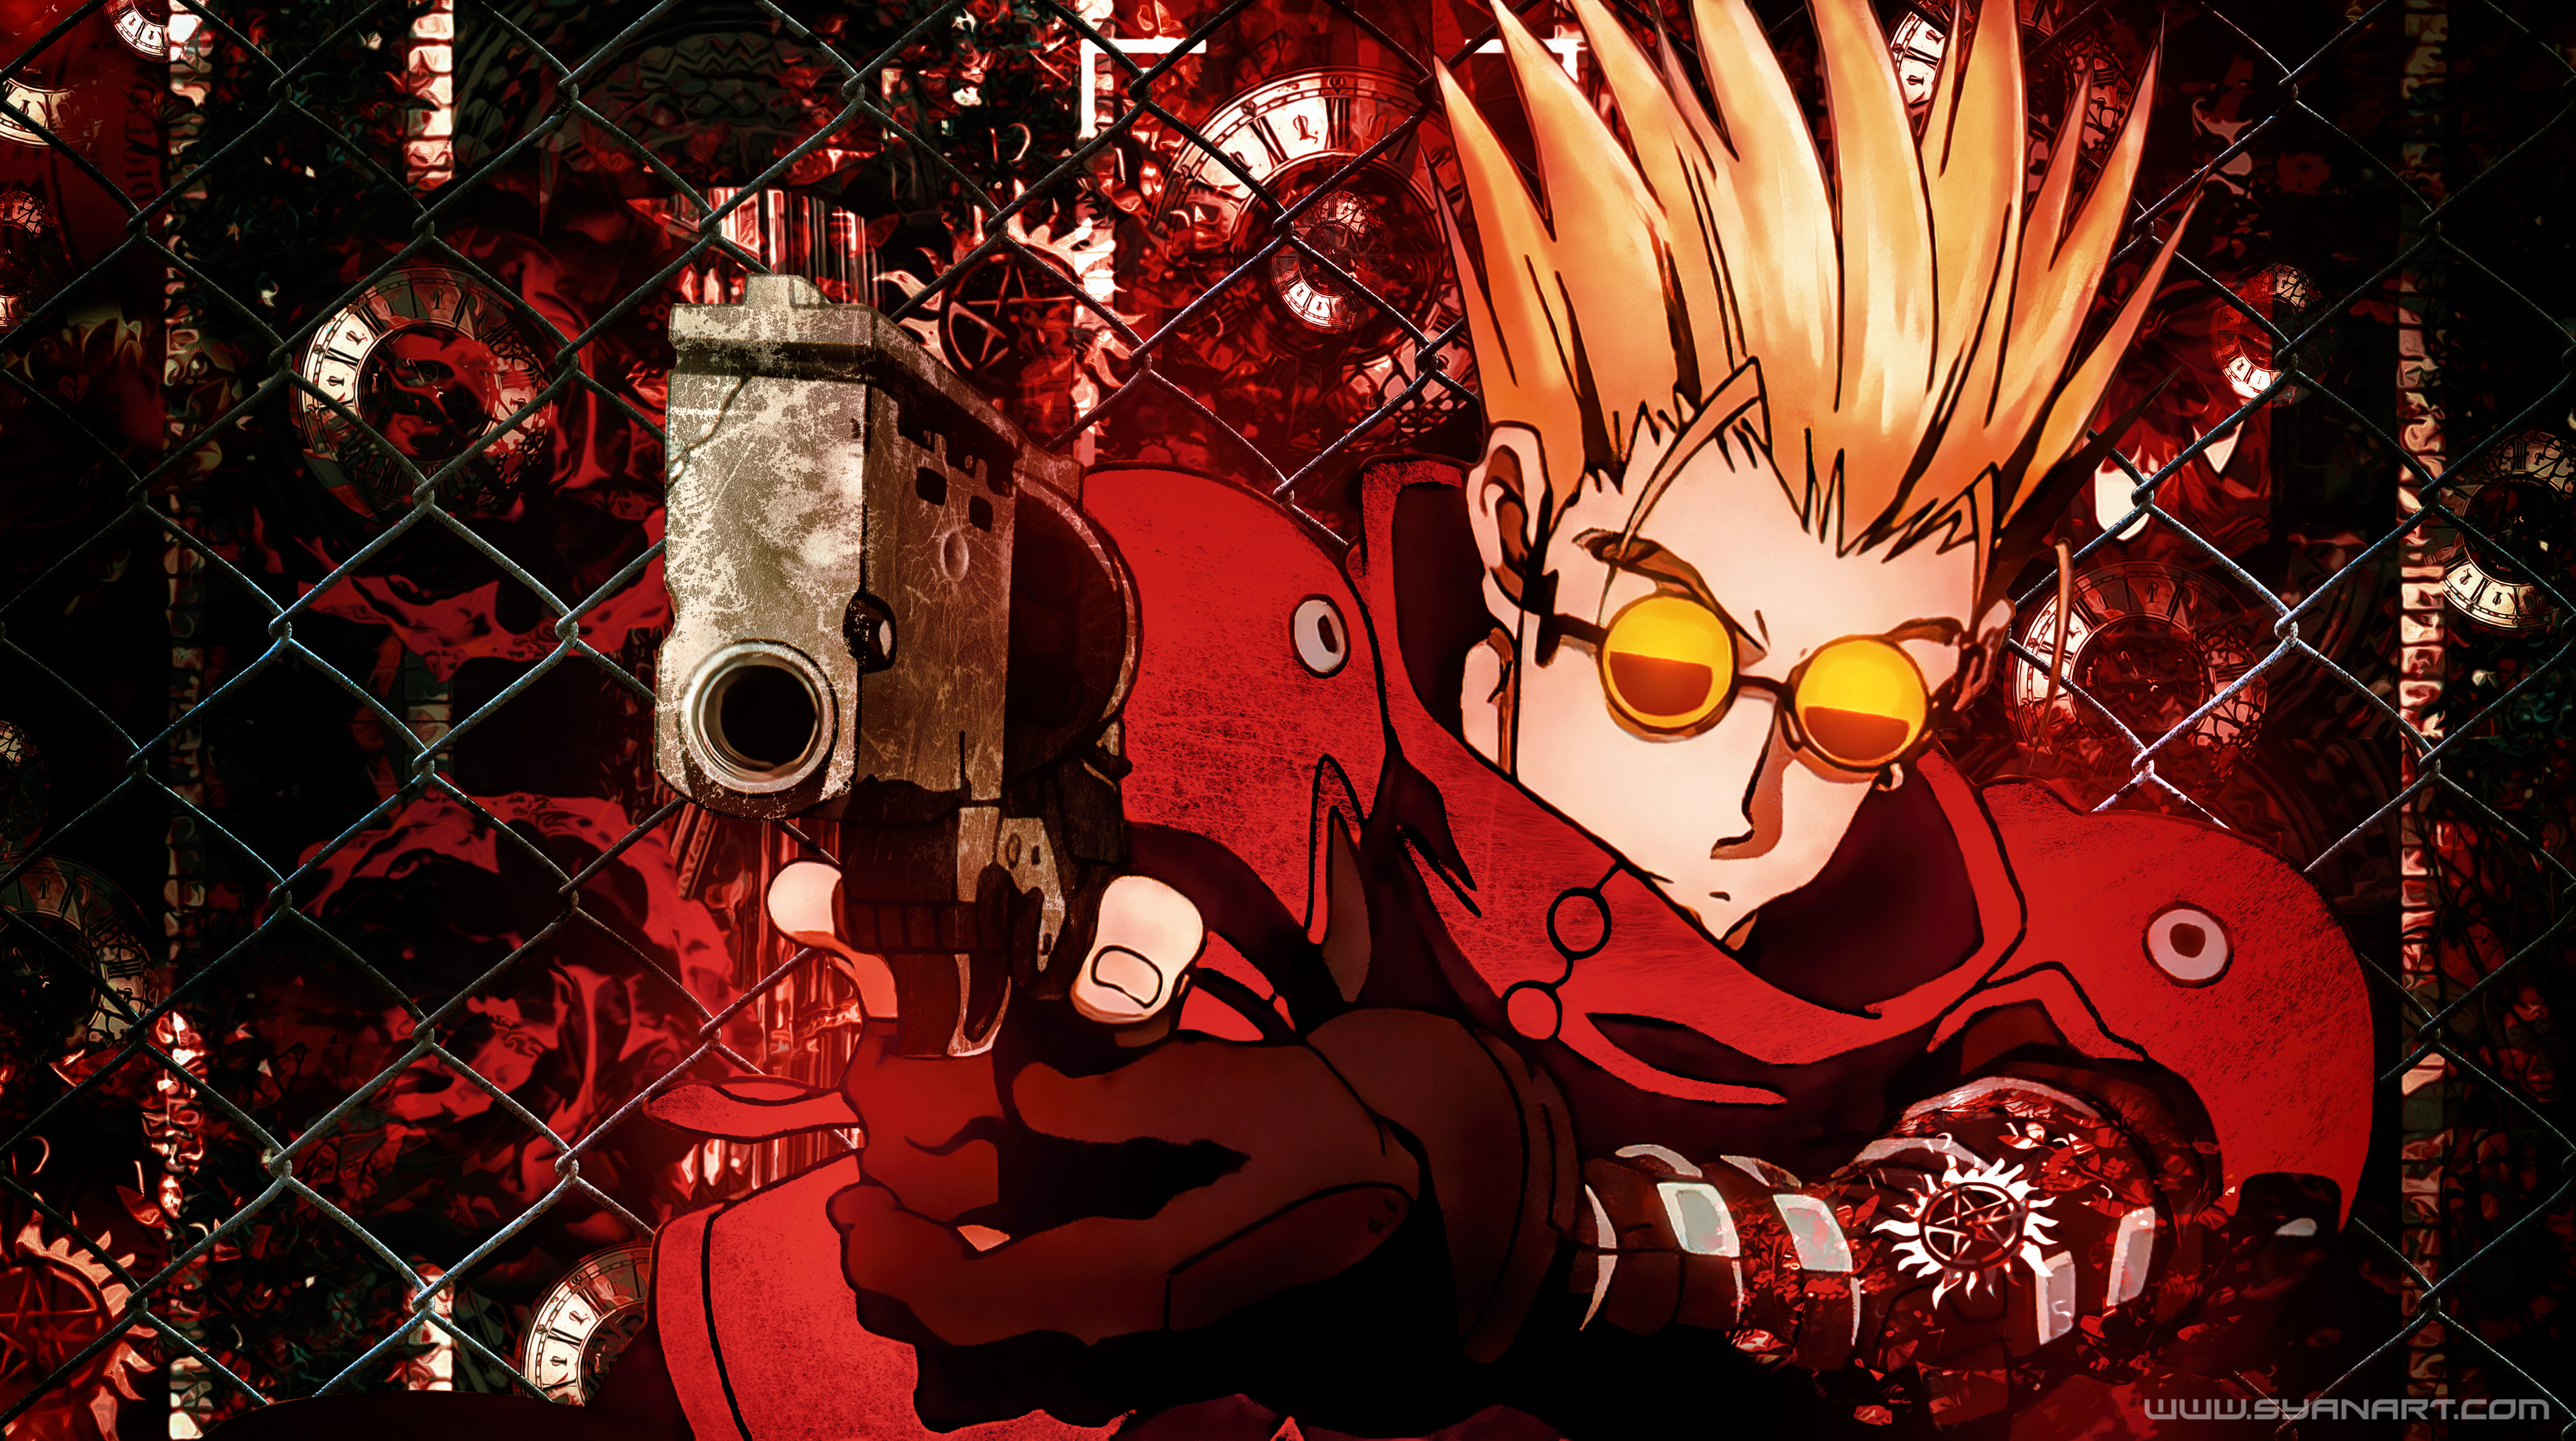 Vash the Stampede HD Wallpaper and Background